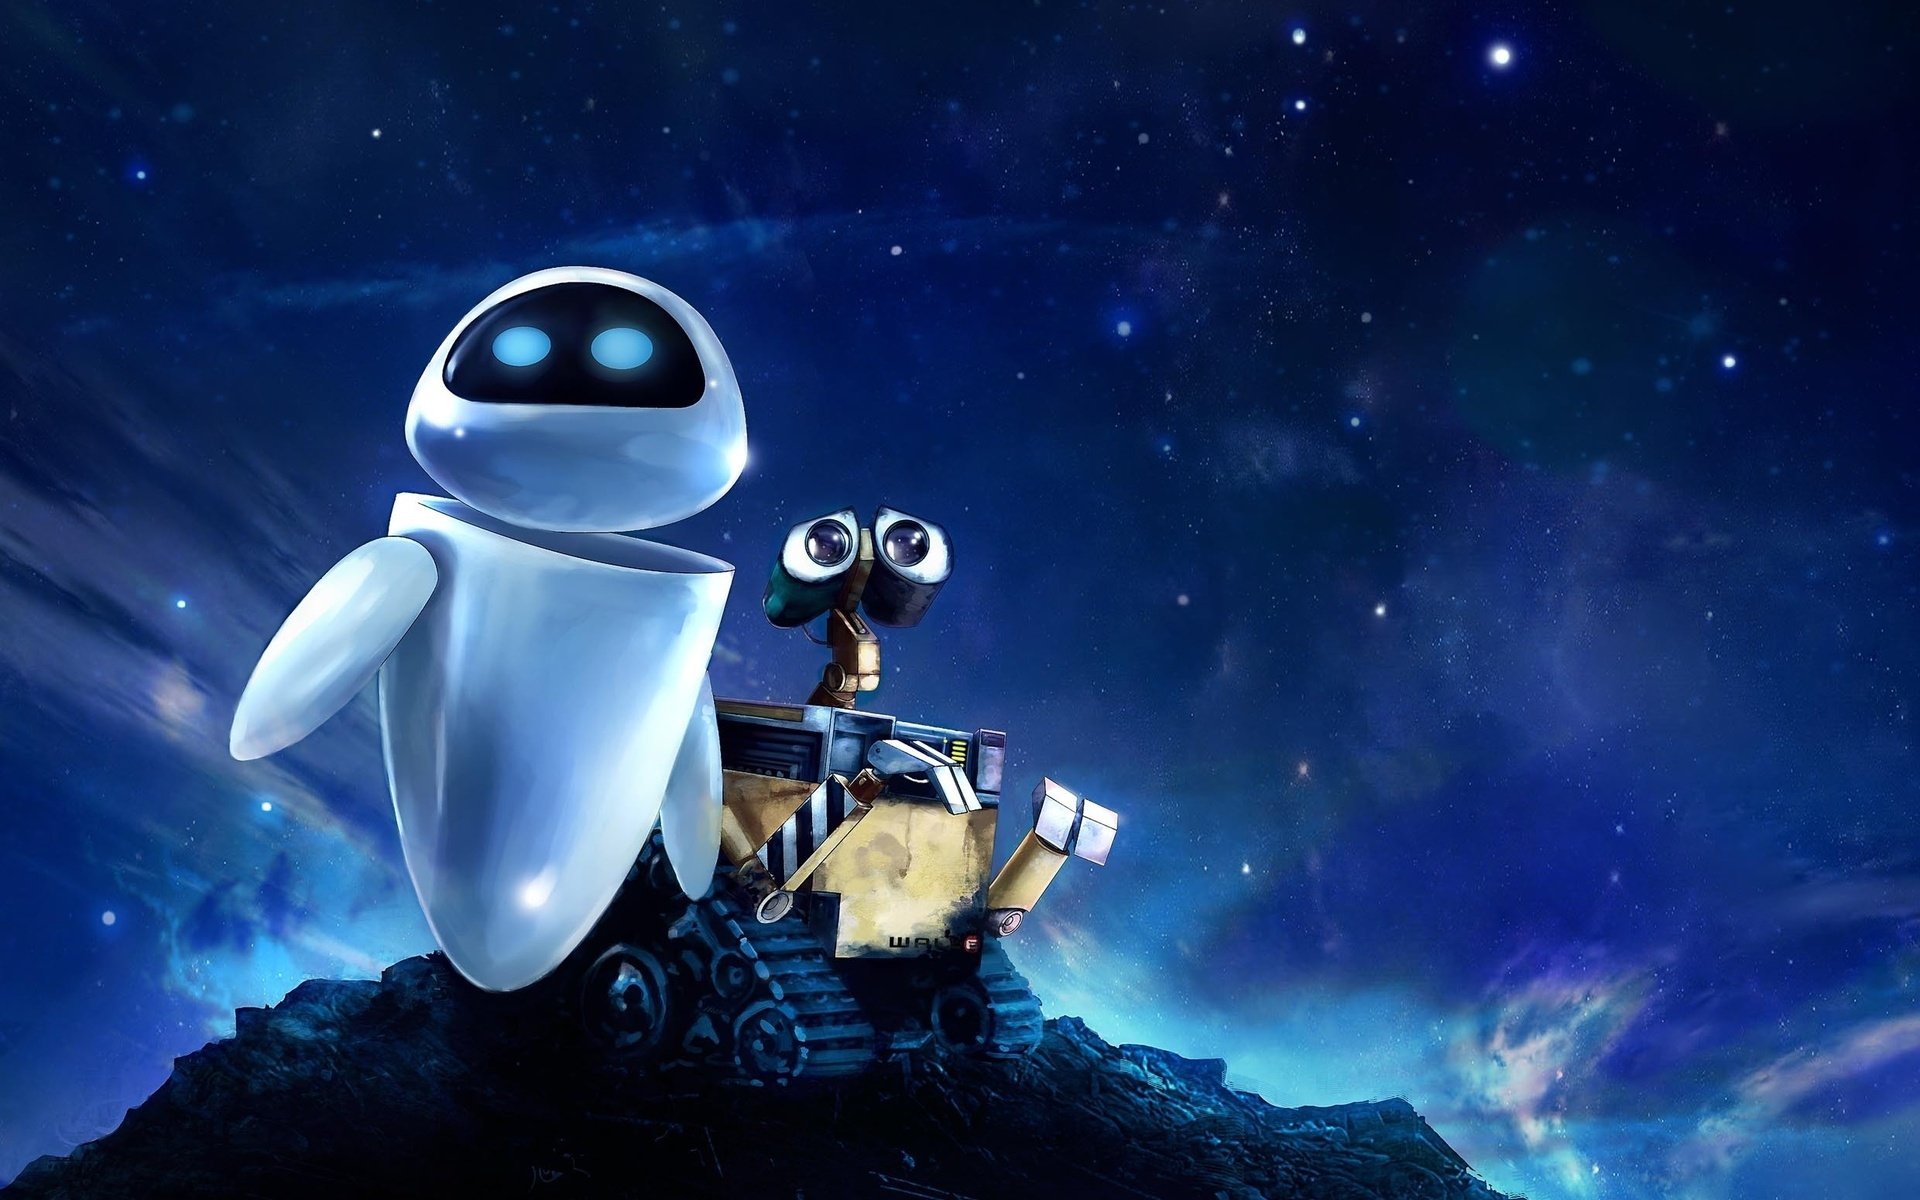 Nice Images Collection: Wall·E Desktop Wallpapers